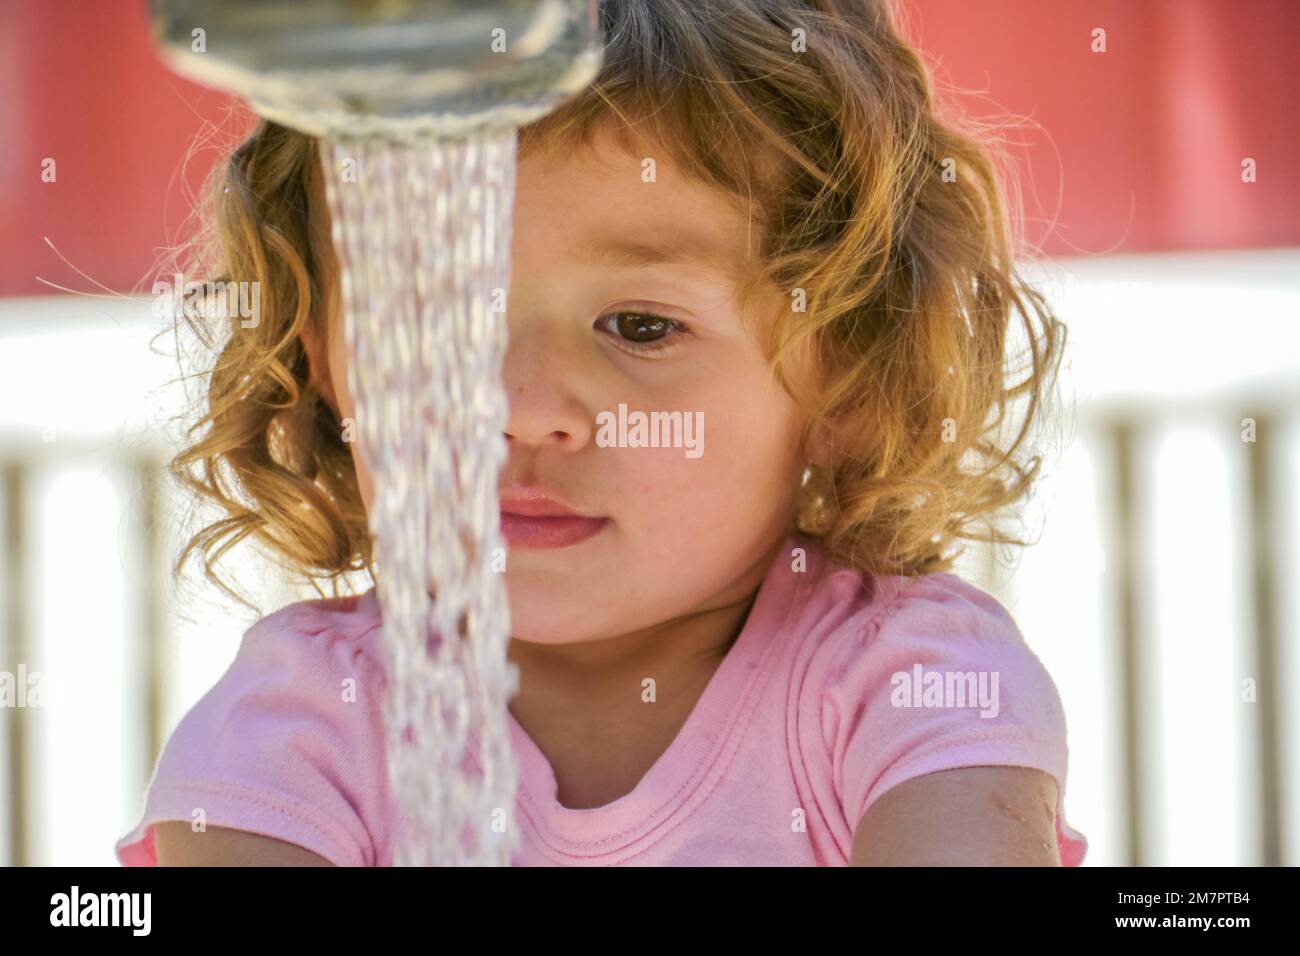 Young girl stands in front of water streaming from faucet washing her hands. Stock Photo